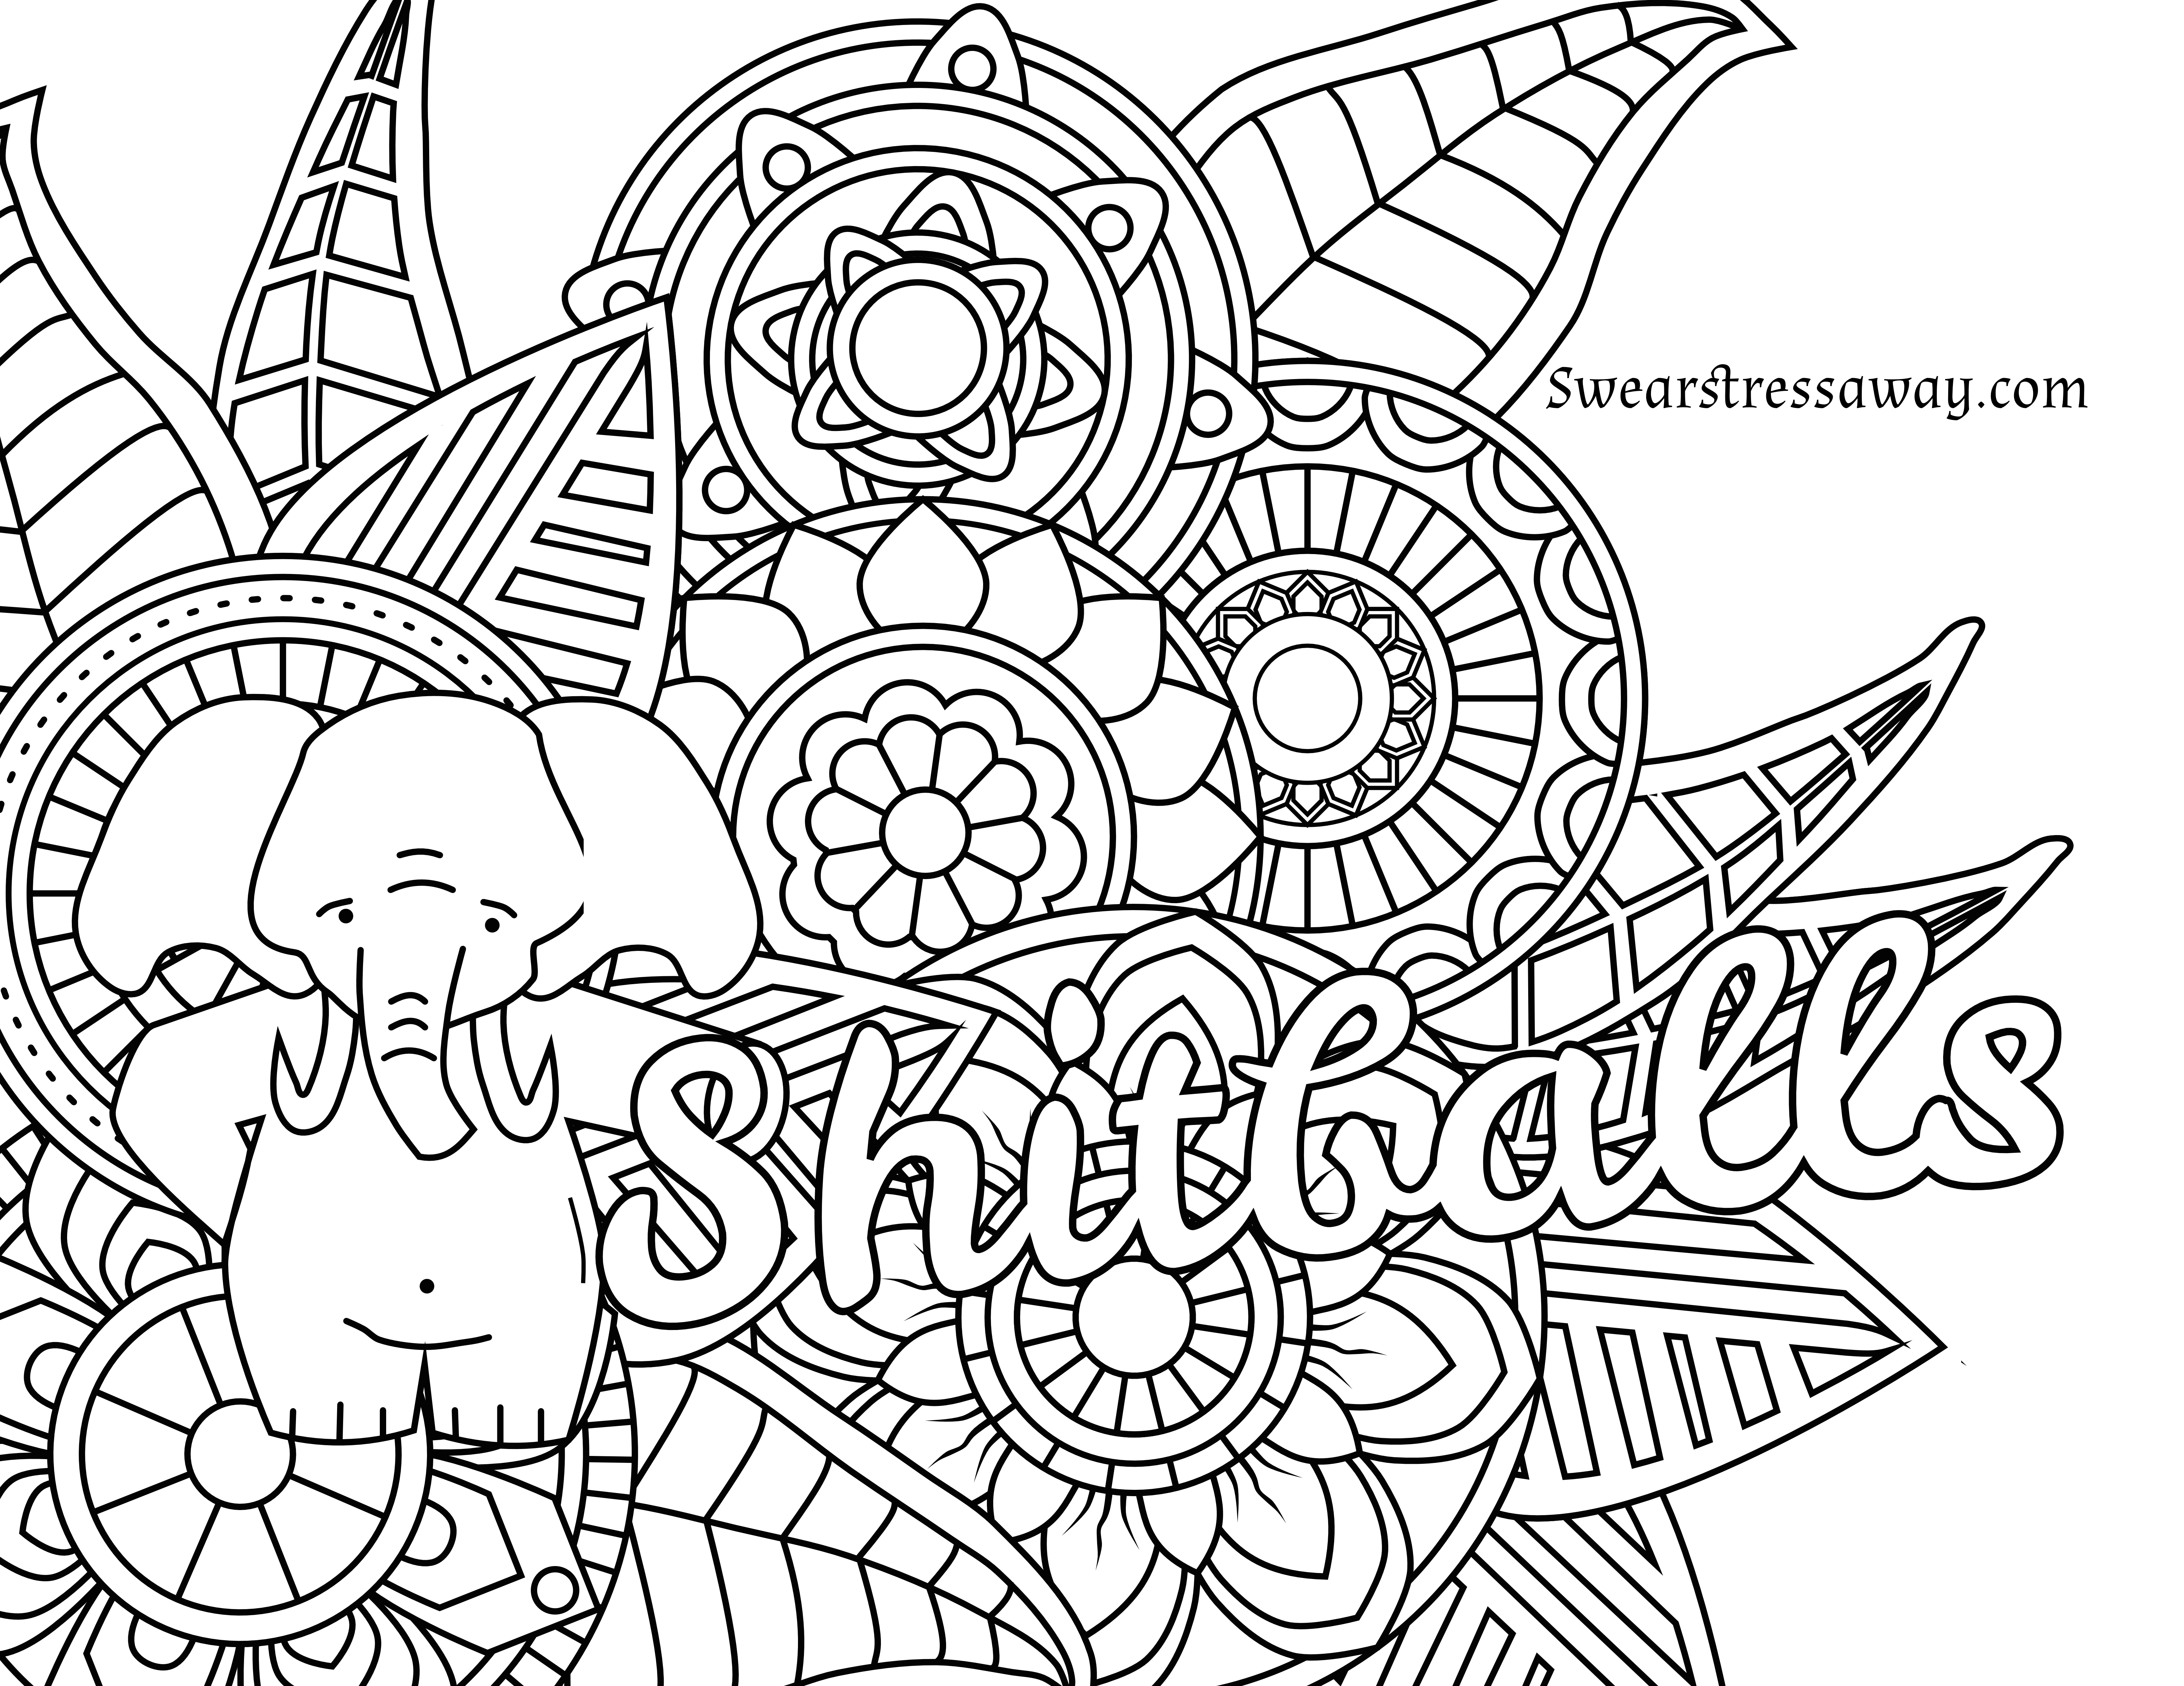 Coloring Pages : Free Printable Coloring Pages Adults Quotes For - Free Printable Coloring Designs For Adults